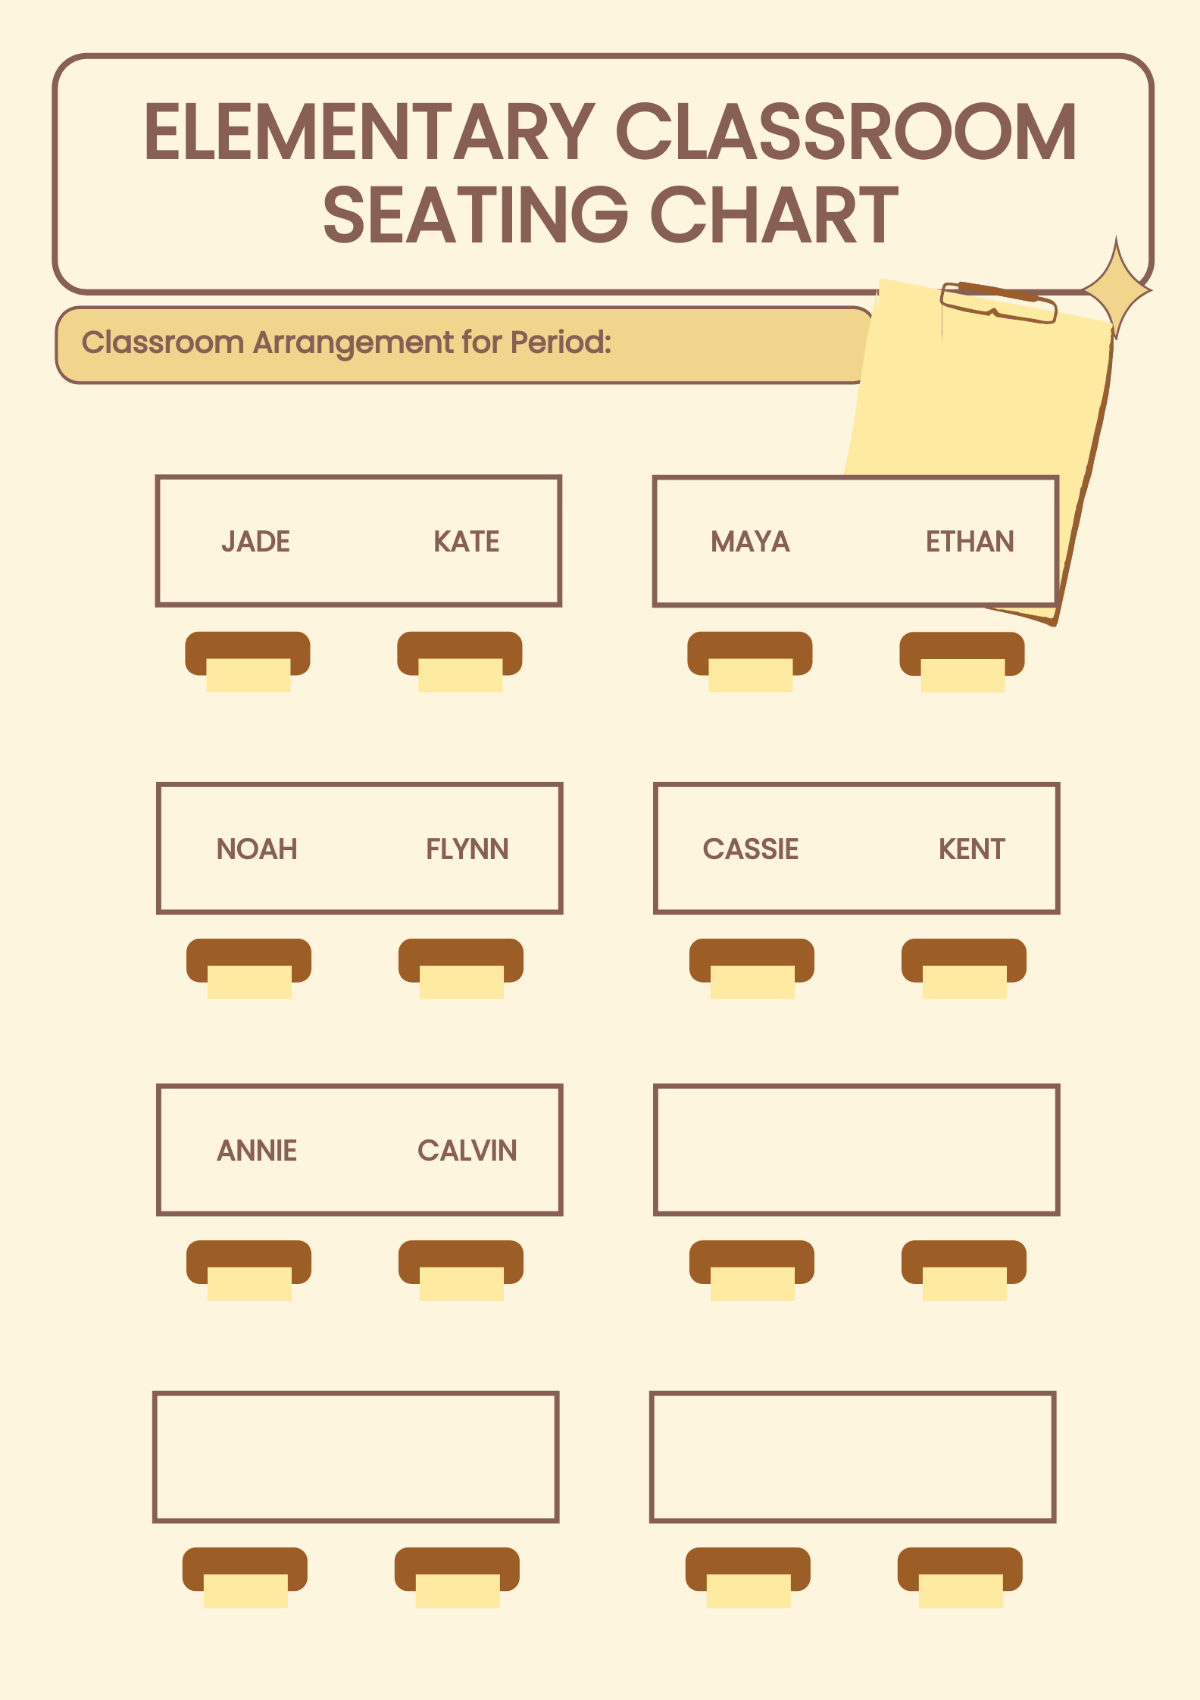 Elementary Classroom Seating Chart Template